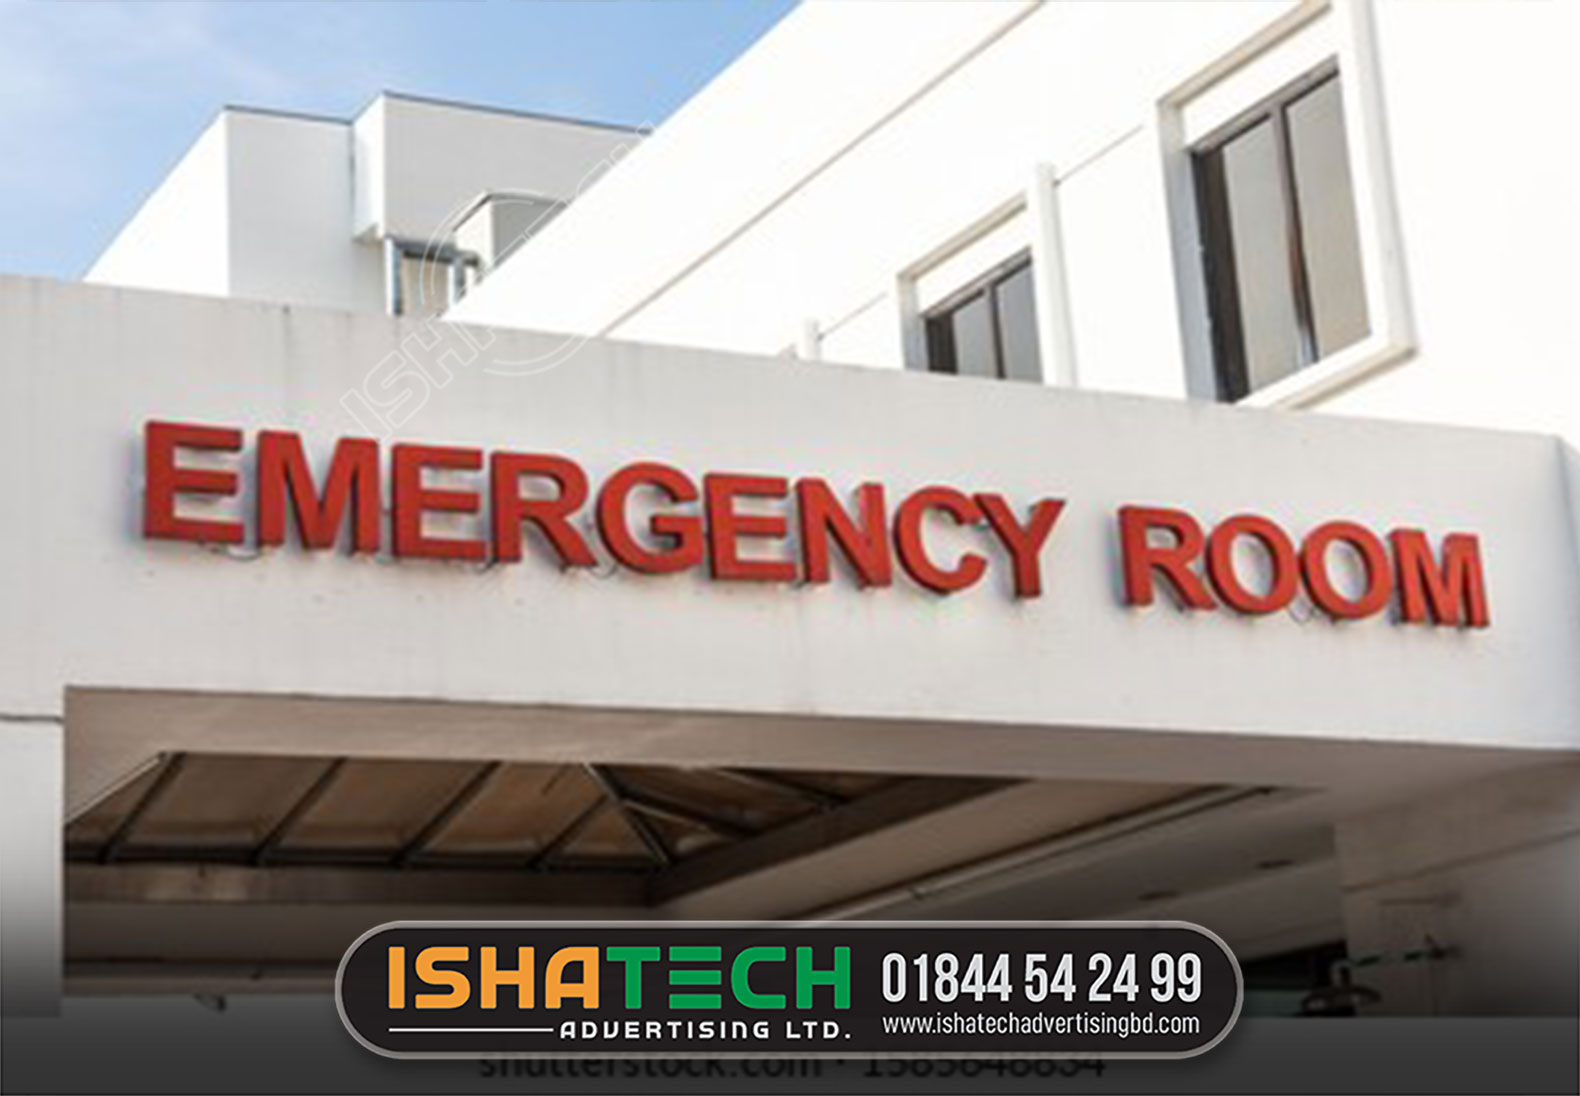 EMERGENCY ROOM NAME PALTE MAKING BY ISHATECH ADVERTISING LTD